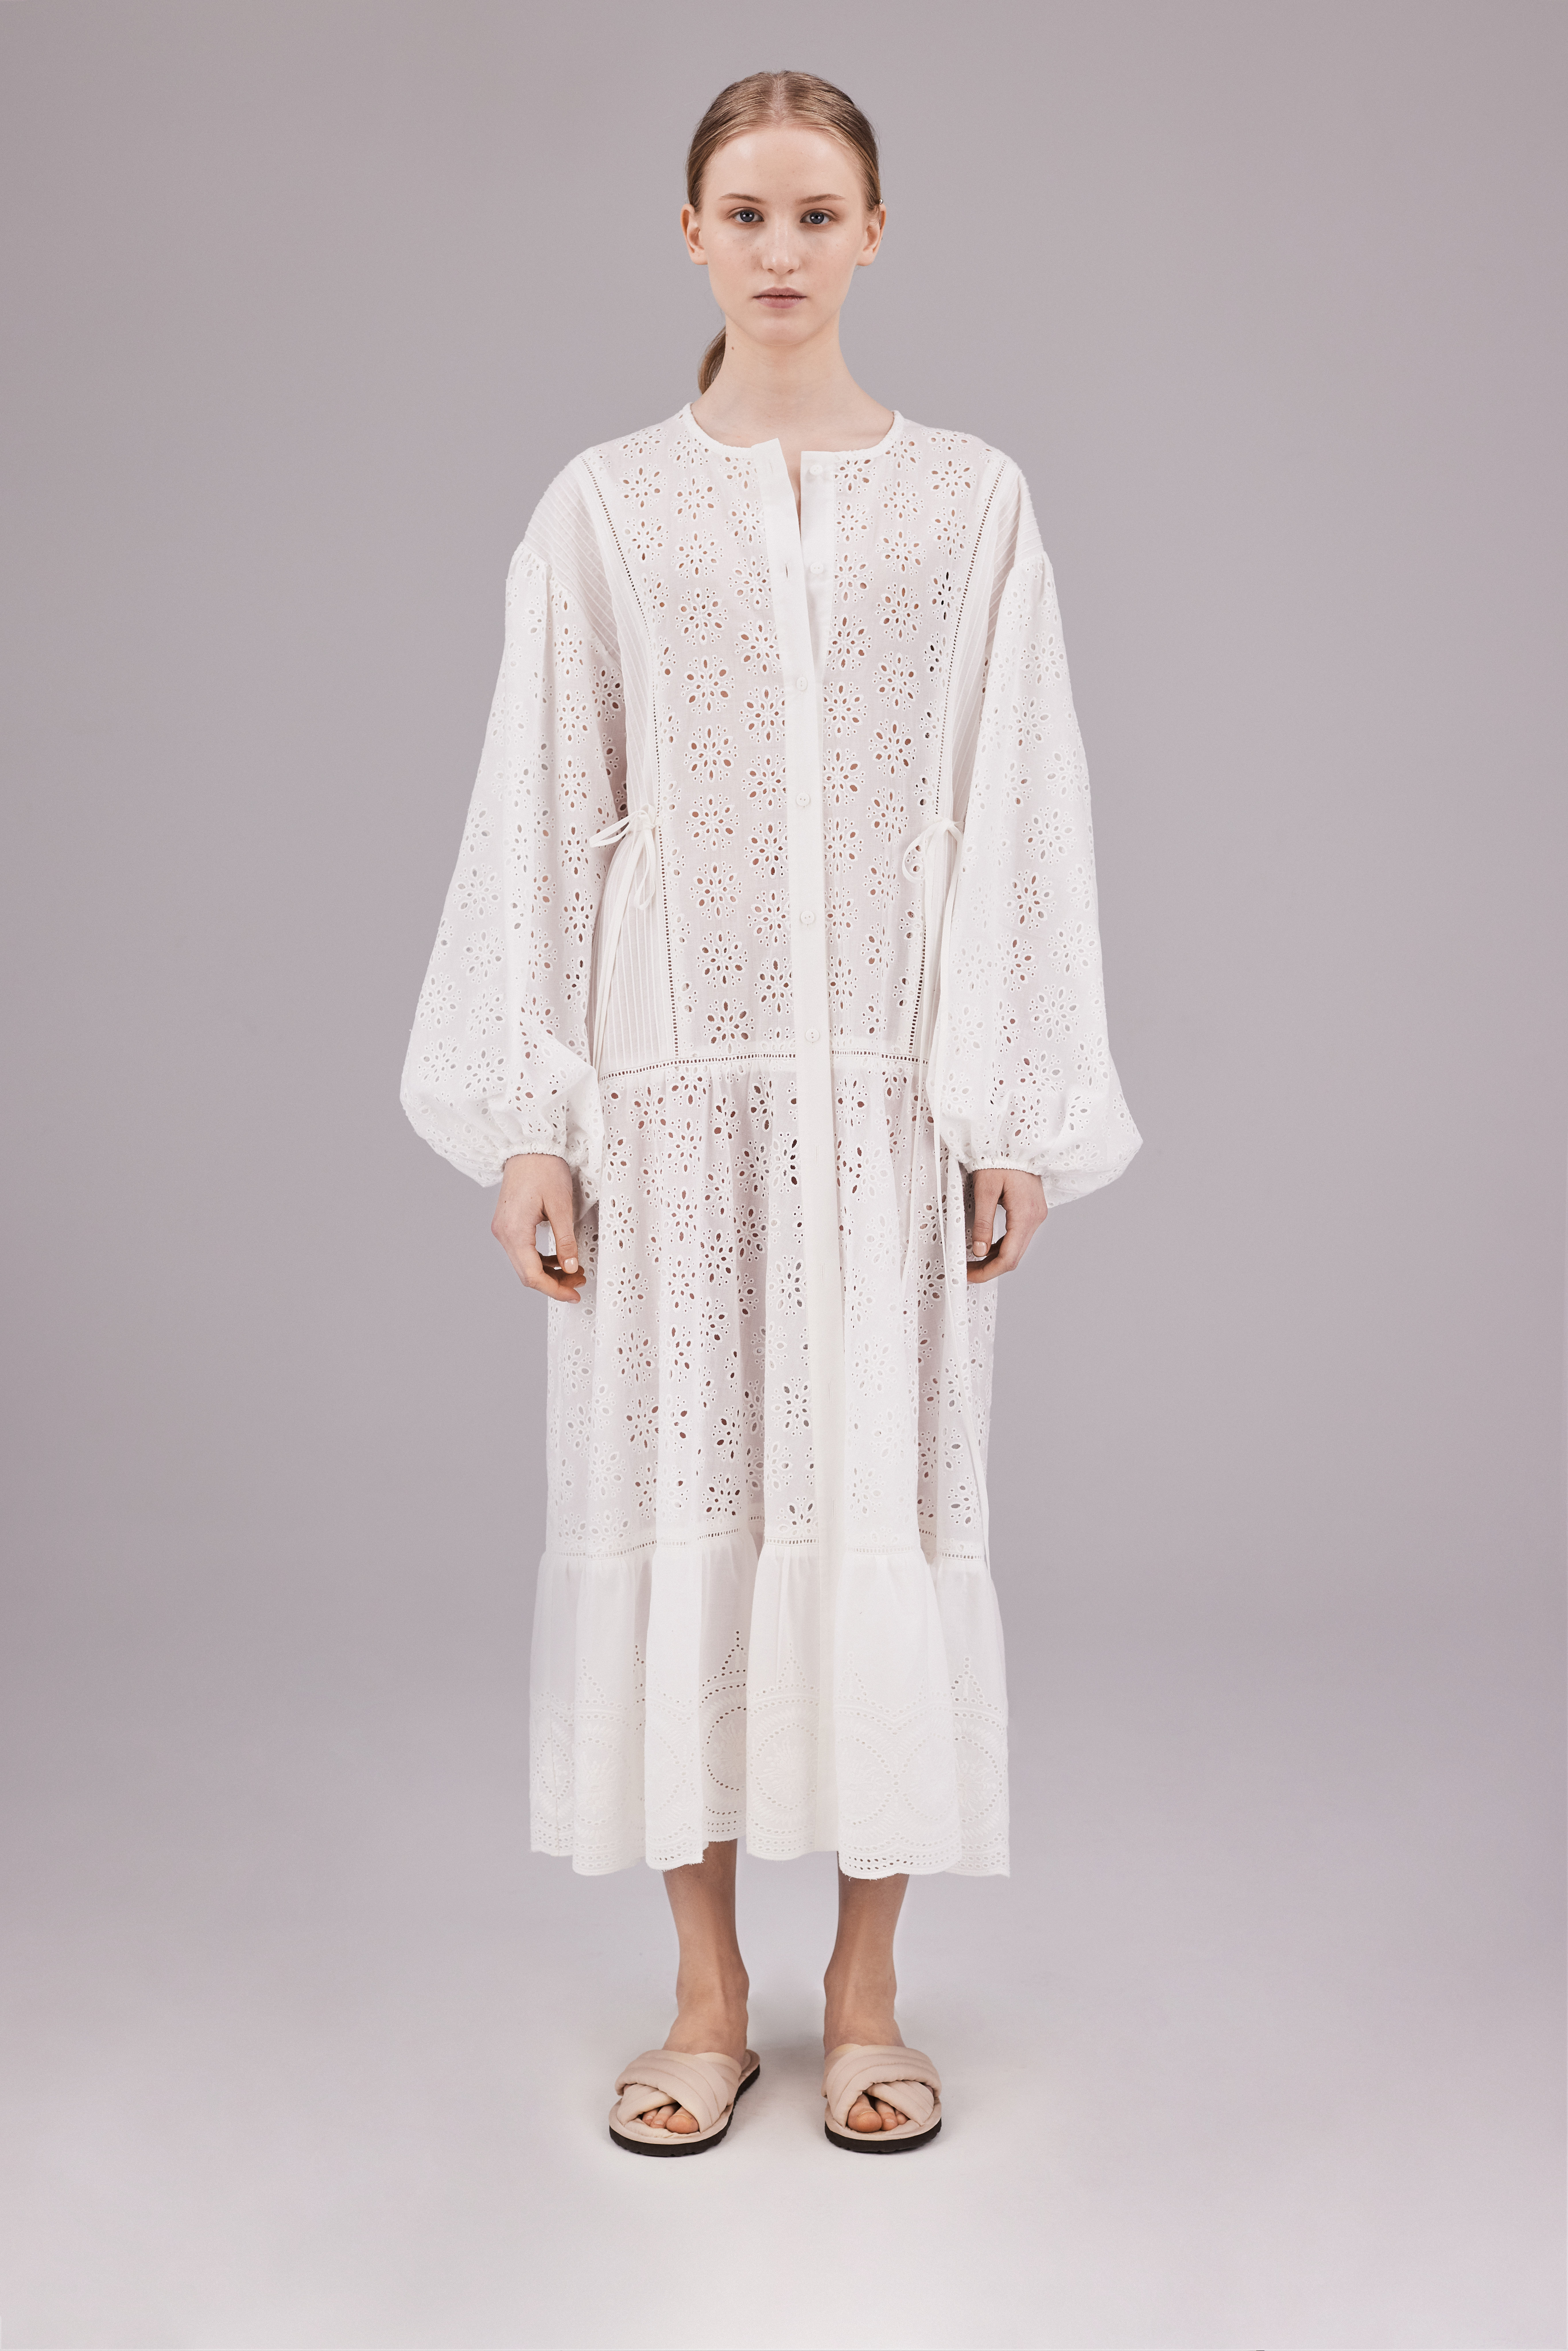 Dress made of embroidered linen